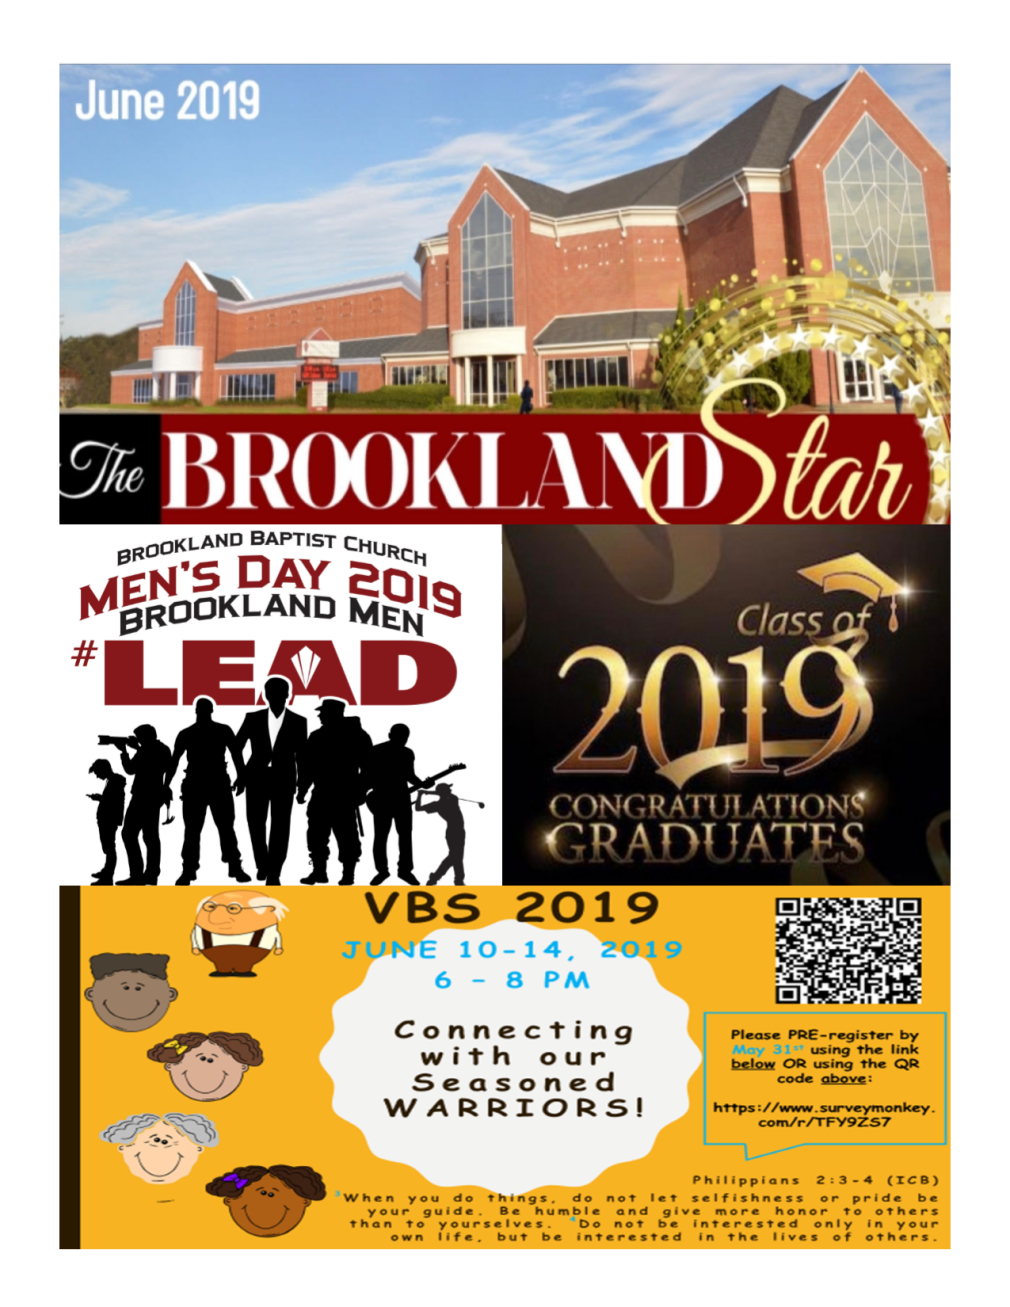 The Brookland Star June 2019 Edition